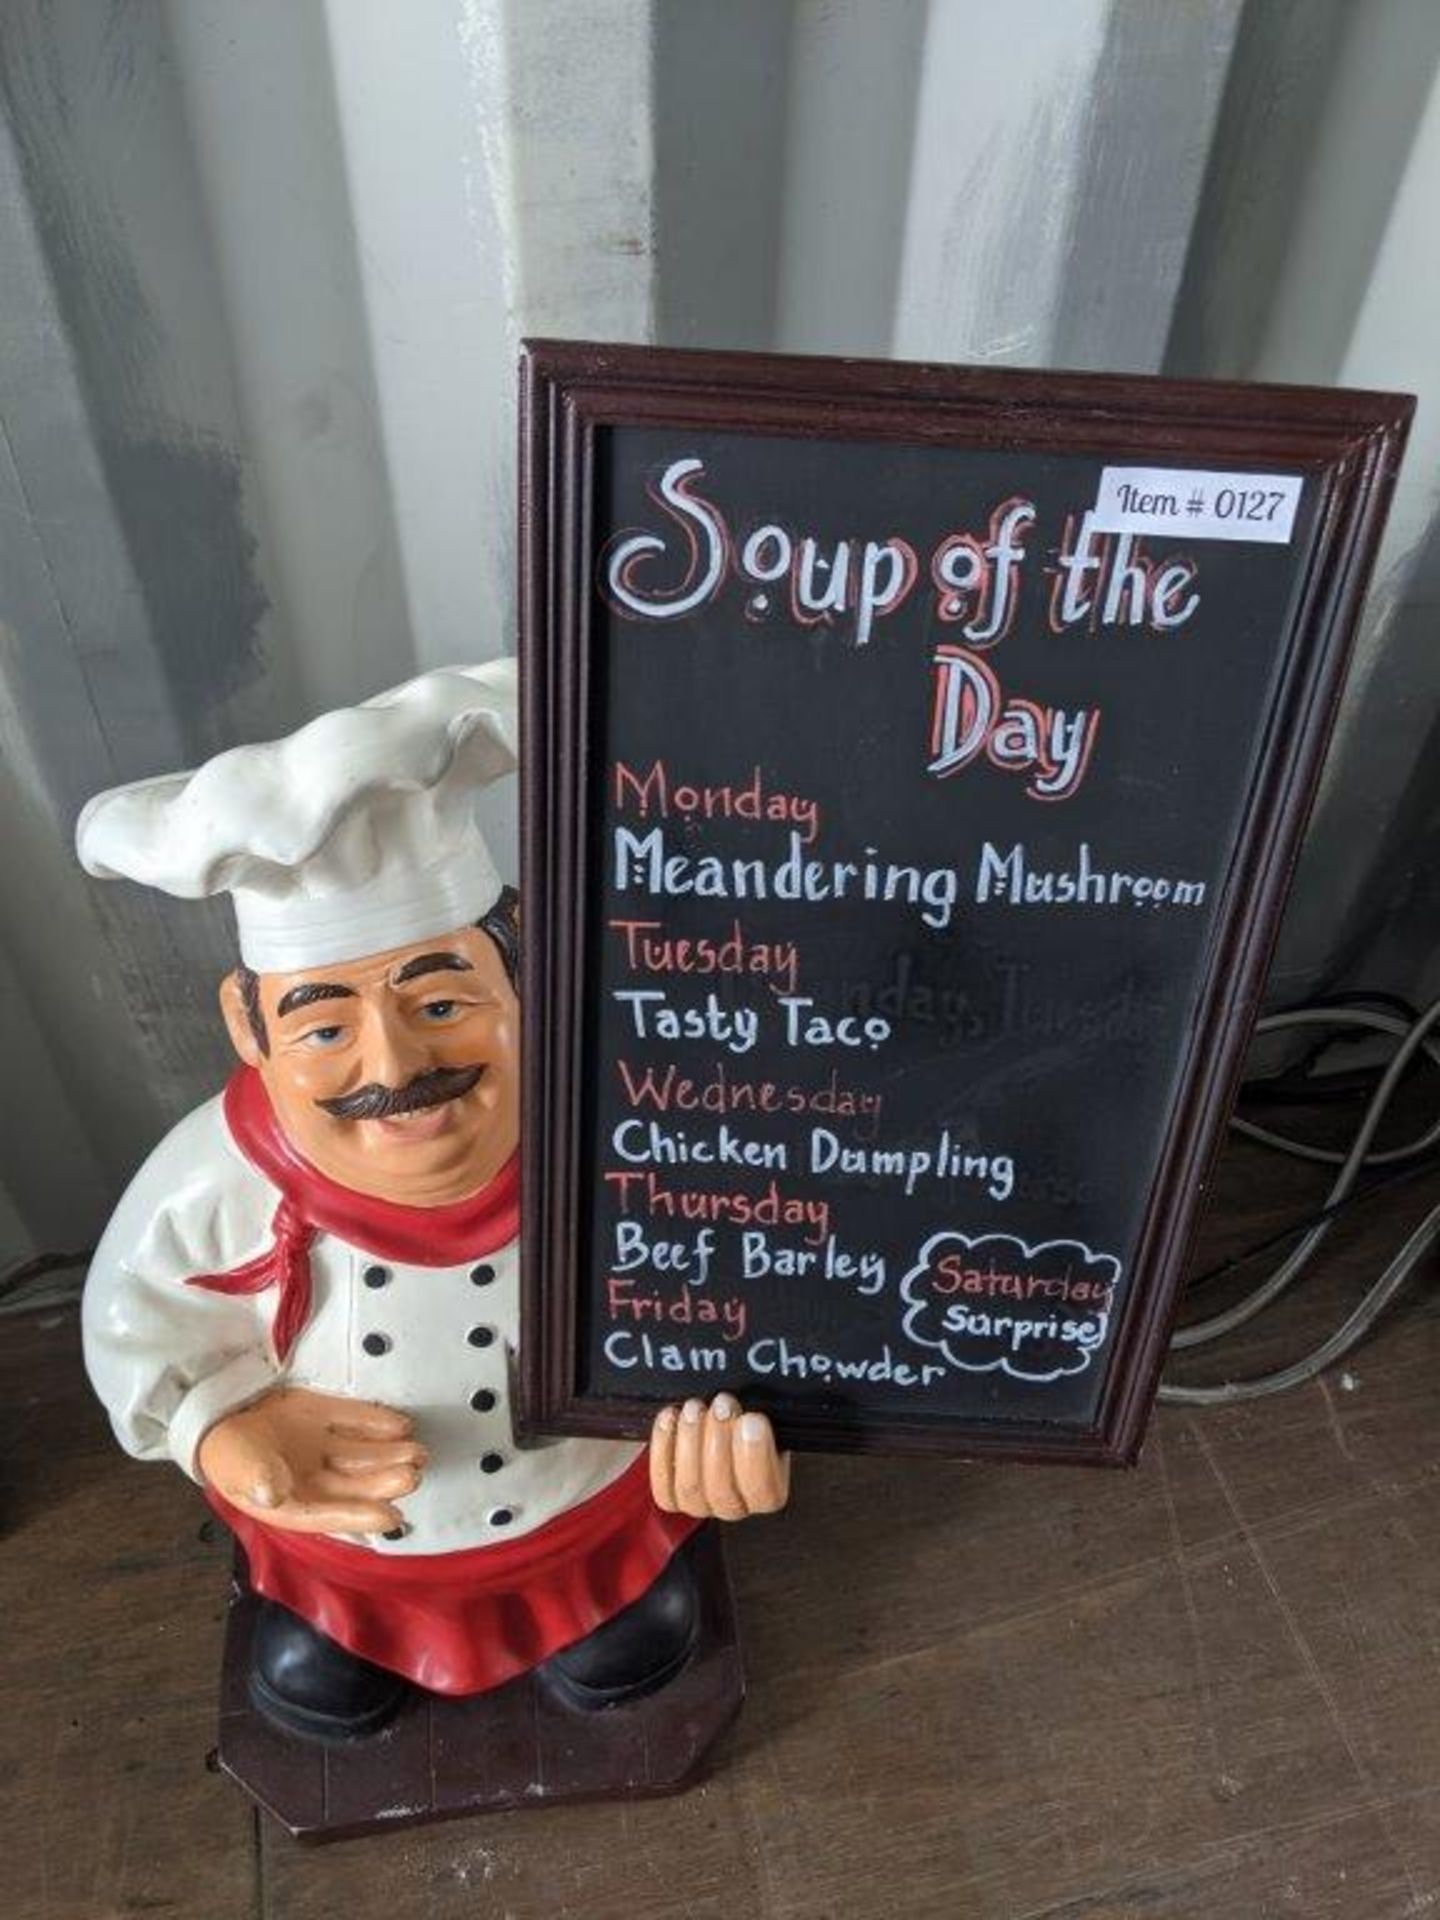 LE CHEF SOUP SIGNAGE STATUE W/FRAMED CHALKBOARD SIGN - 34 INCH HIGH